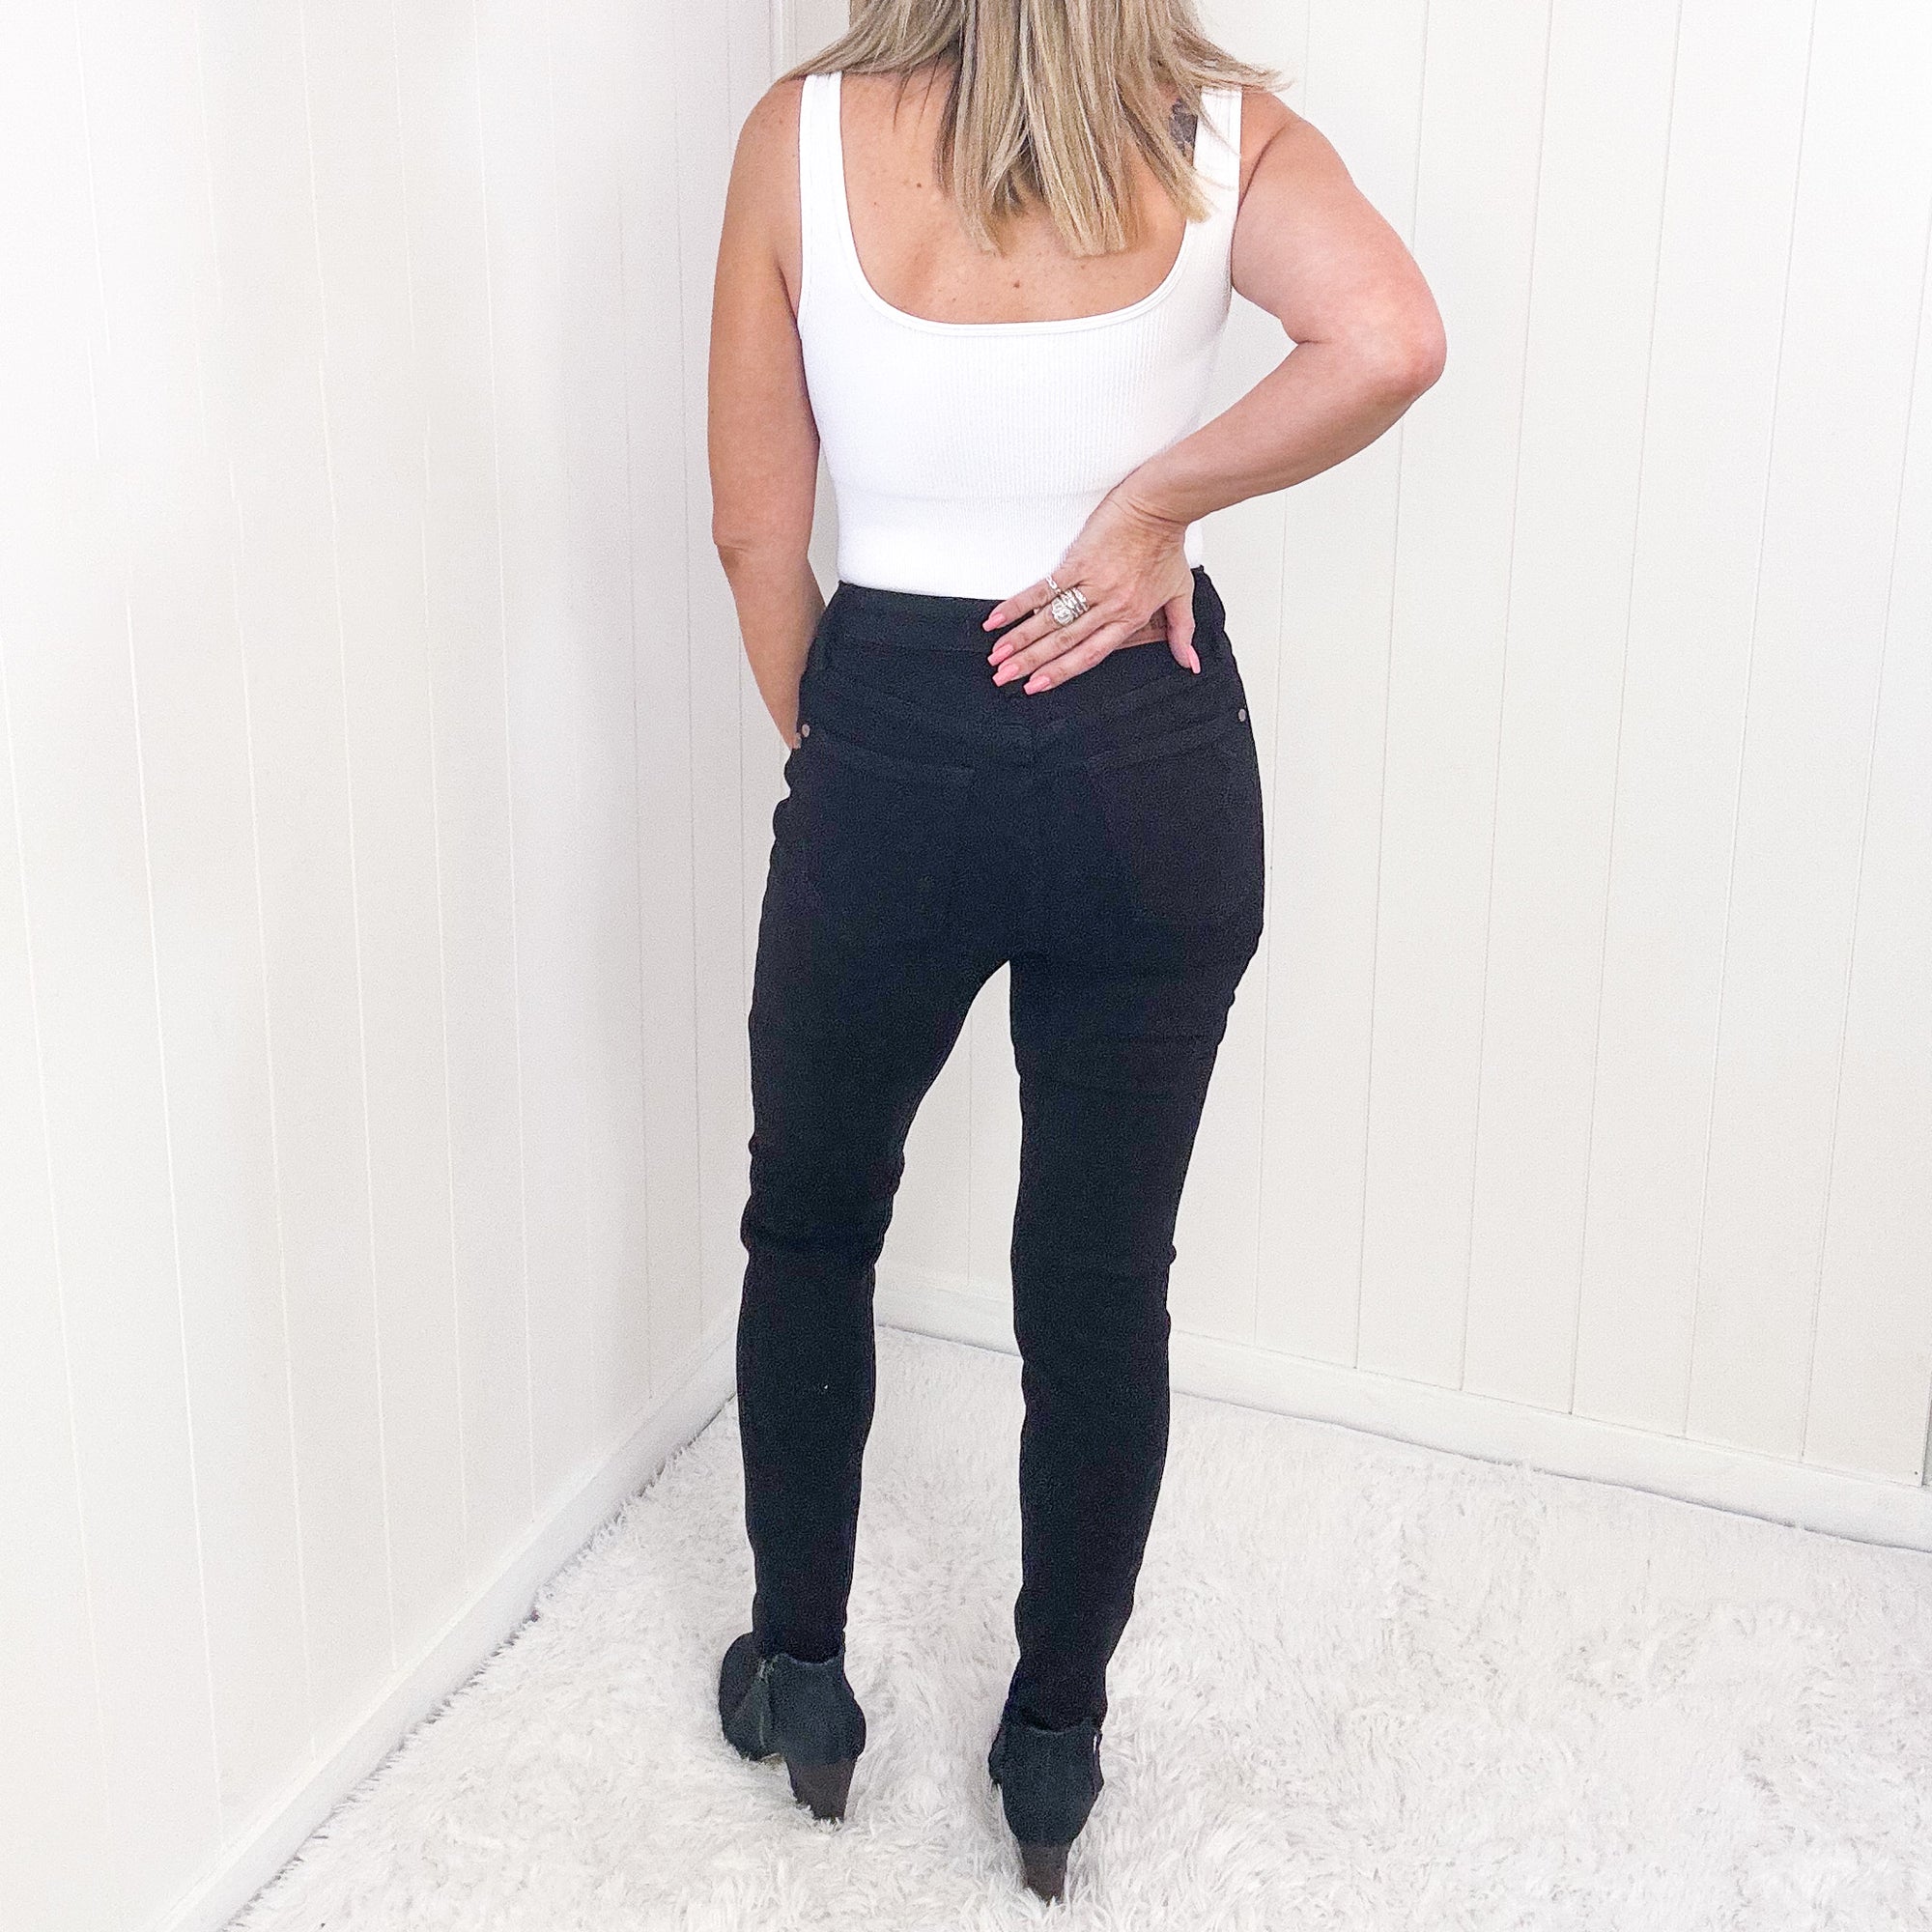 Judy Blue Black Distressed Tummy Control High Waist Skinny Jeans - Boujee Boutique 